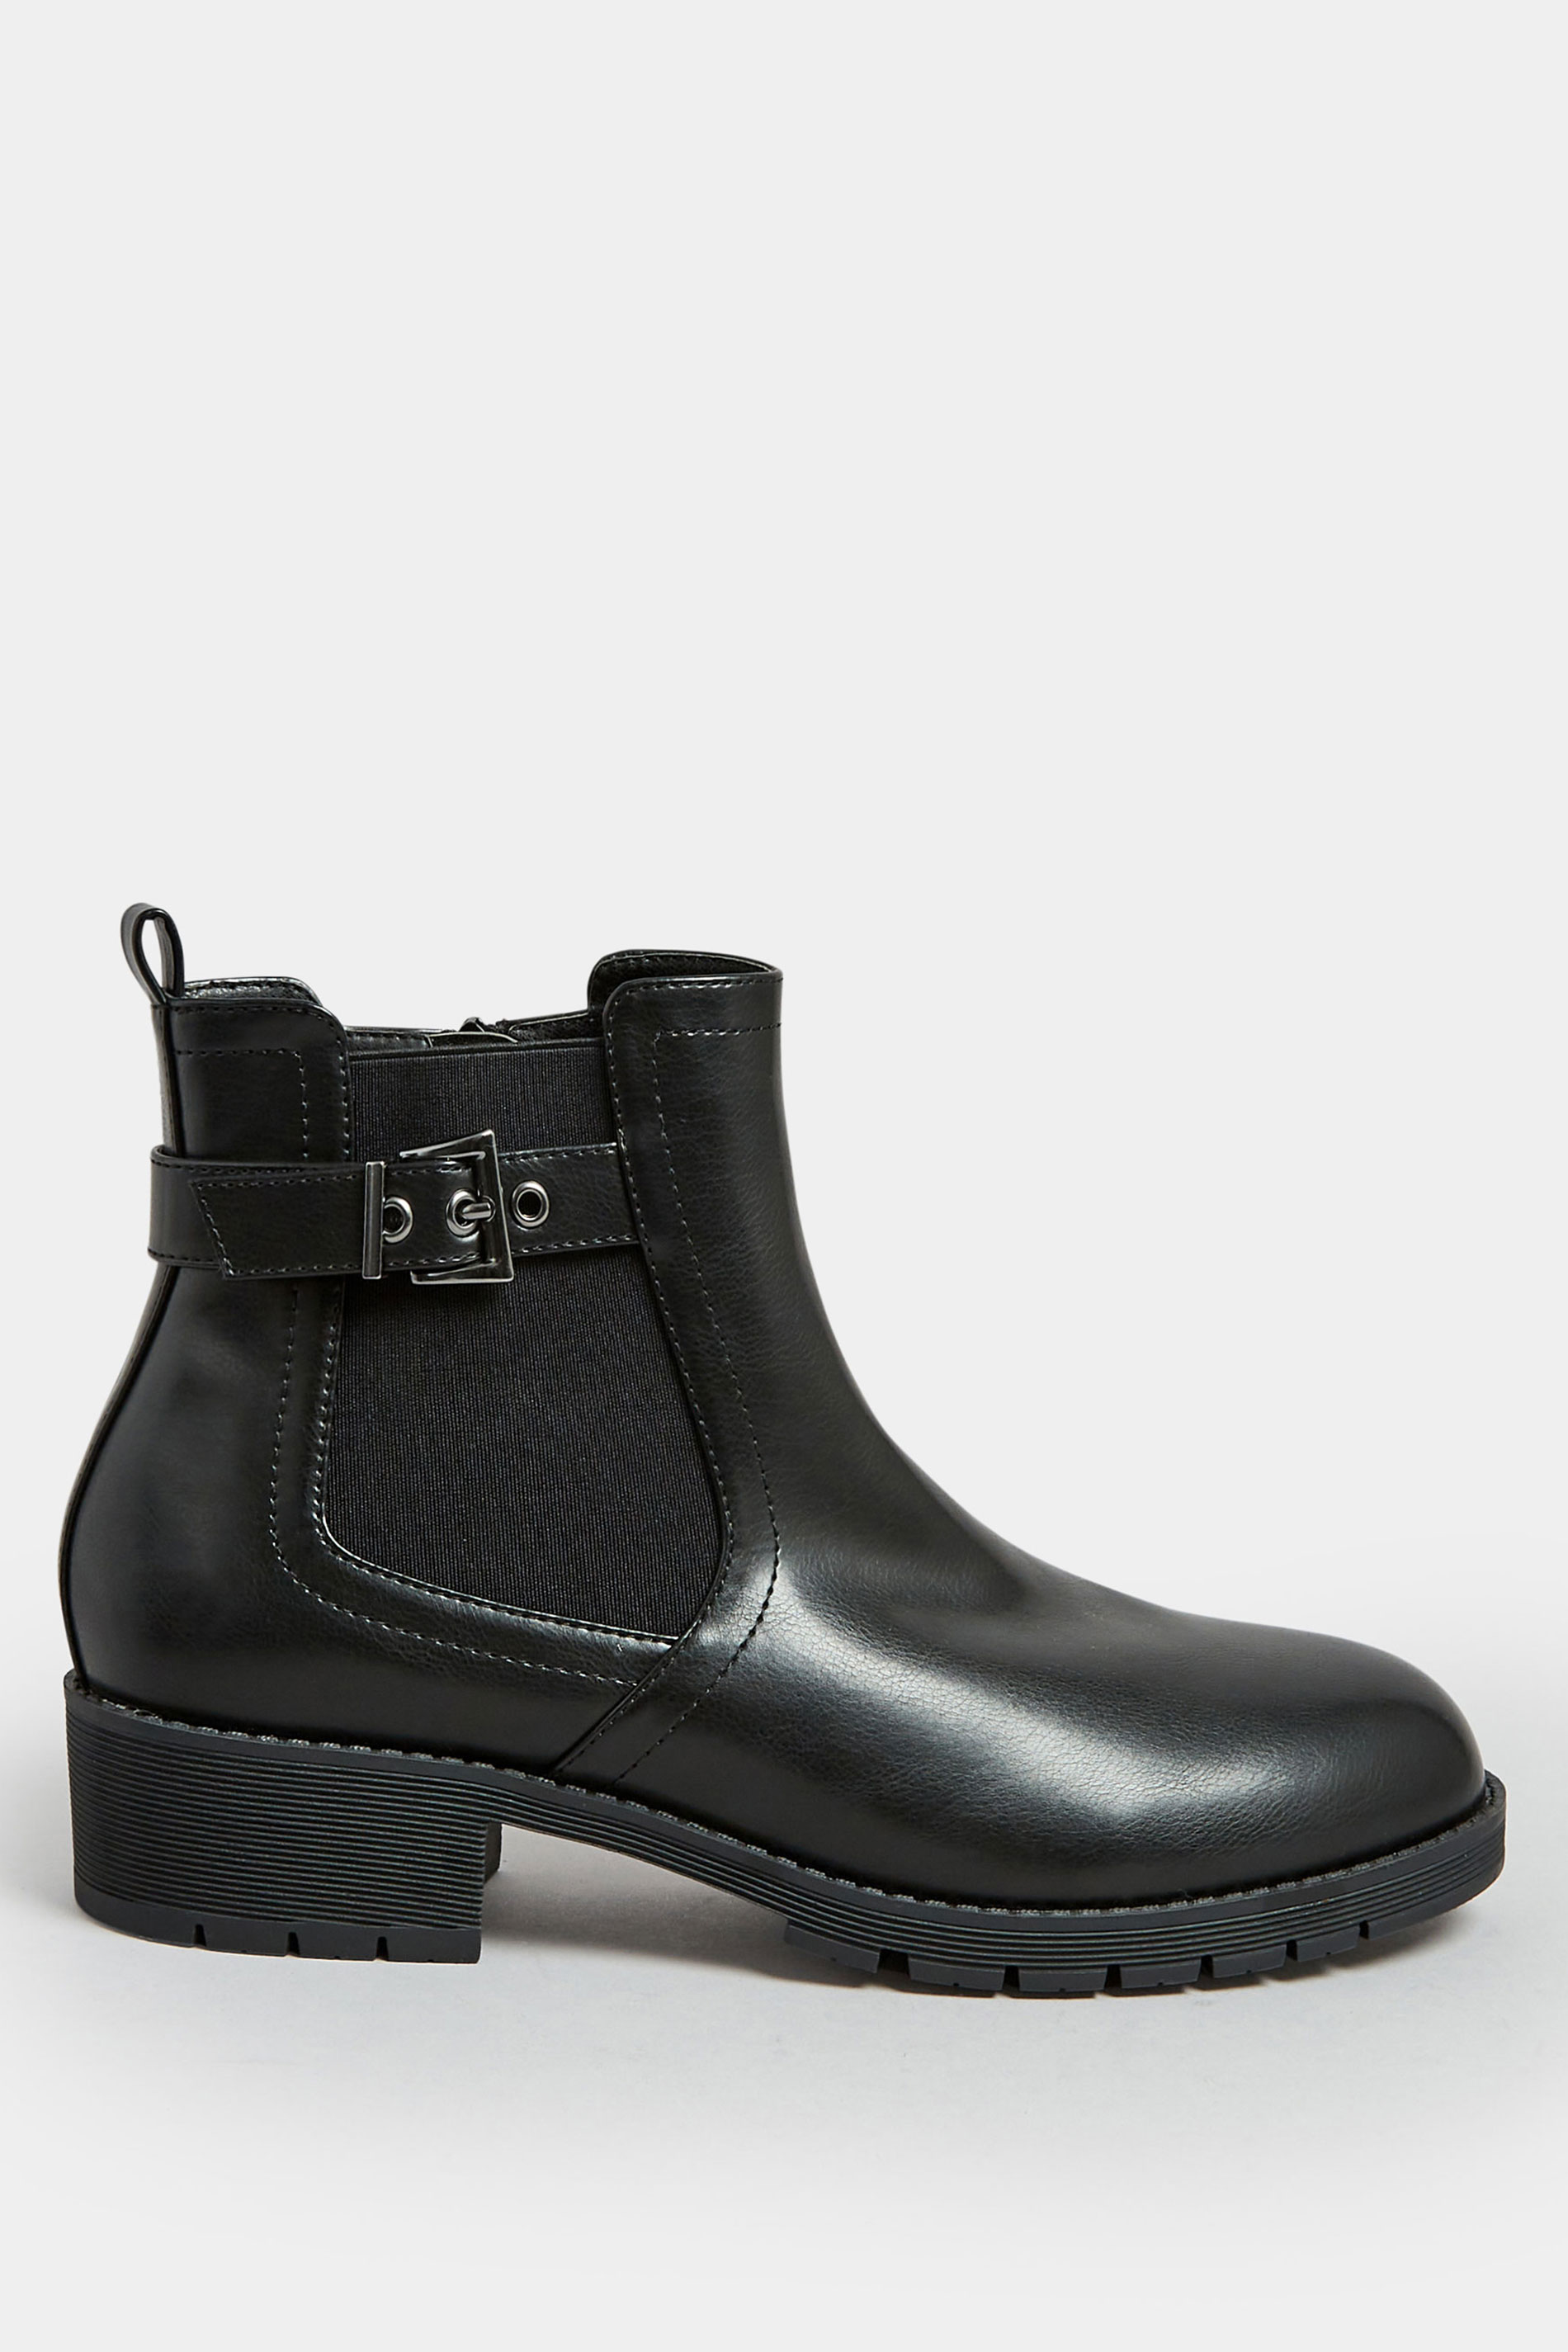 Black Faux Leather Buckle Ankle Boots In Wide E Fit & Extra Wide EEE Fit | Yours Clothing 3